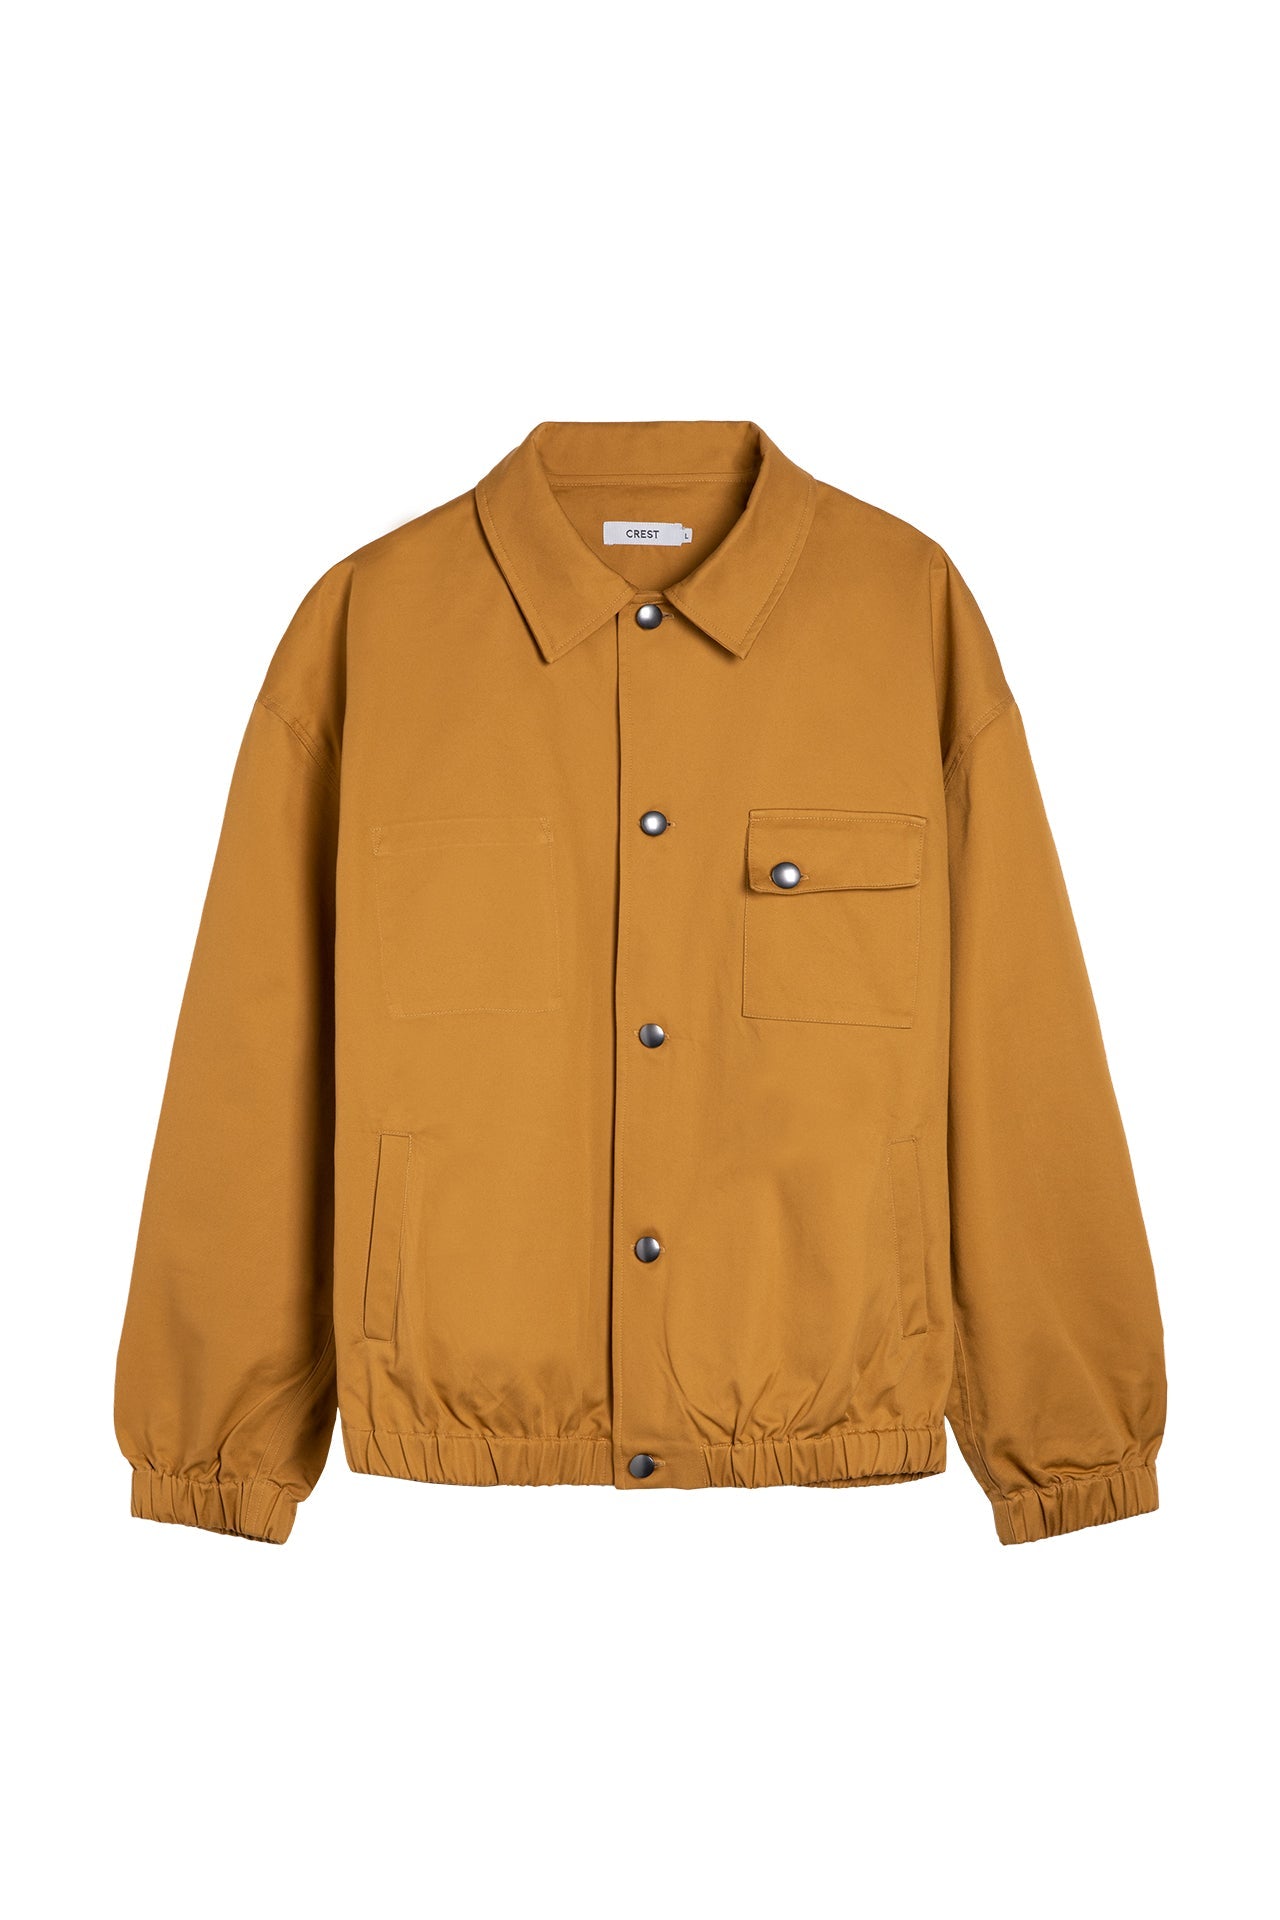 Mustard Yellow Patch Lightweight Men's Jacket displayed against a neutral background, featuring dropped shoulders and Cobrax® front button opening